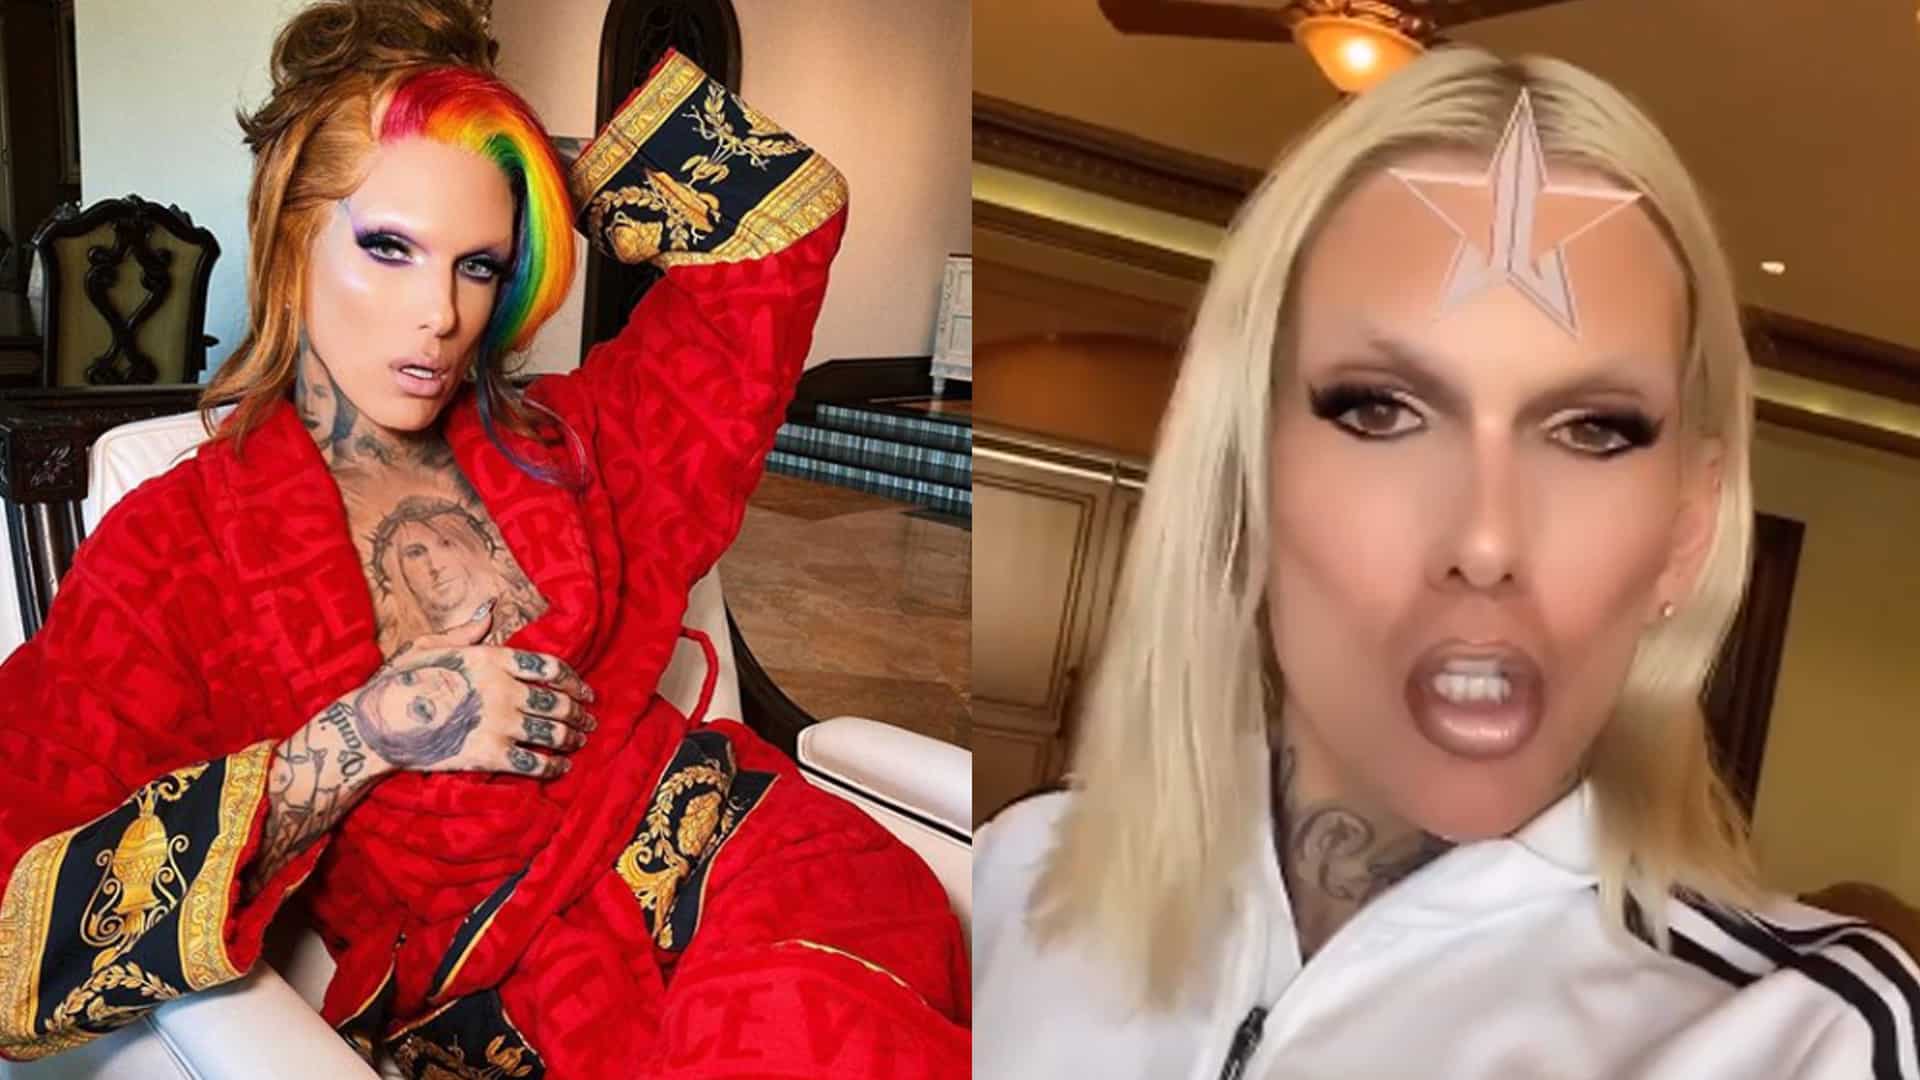 Jeffree Star Sexual Assault History Exposed Amid Stealing Accusations.